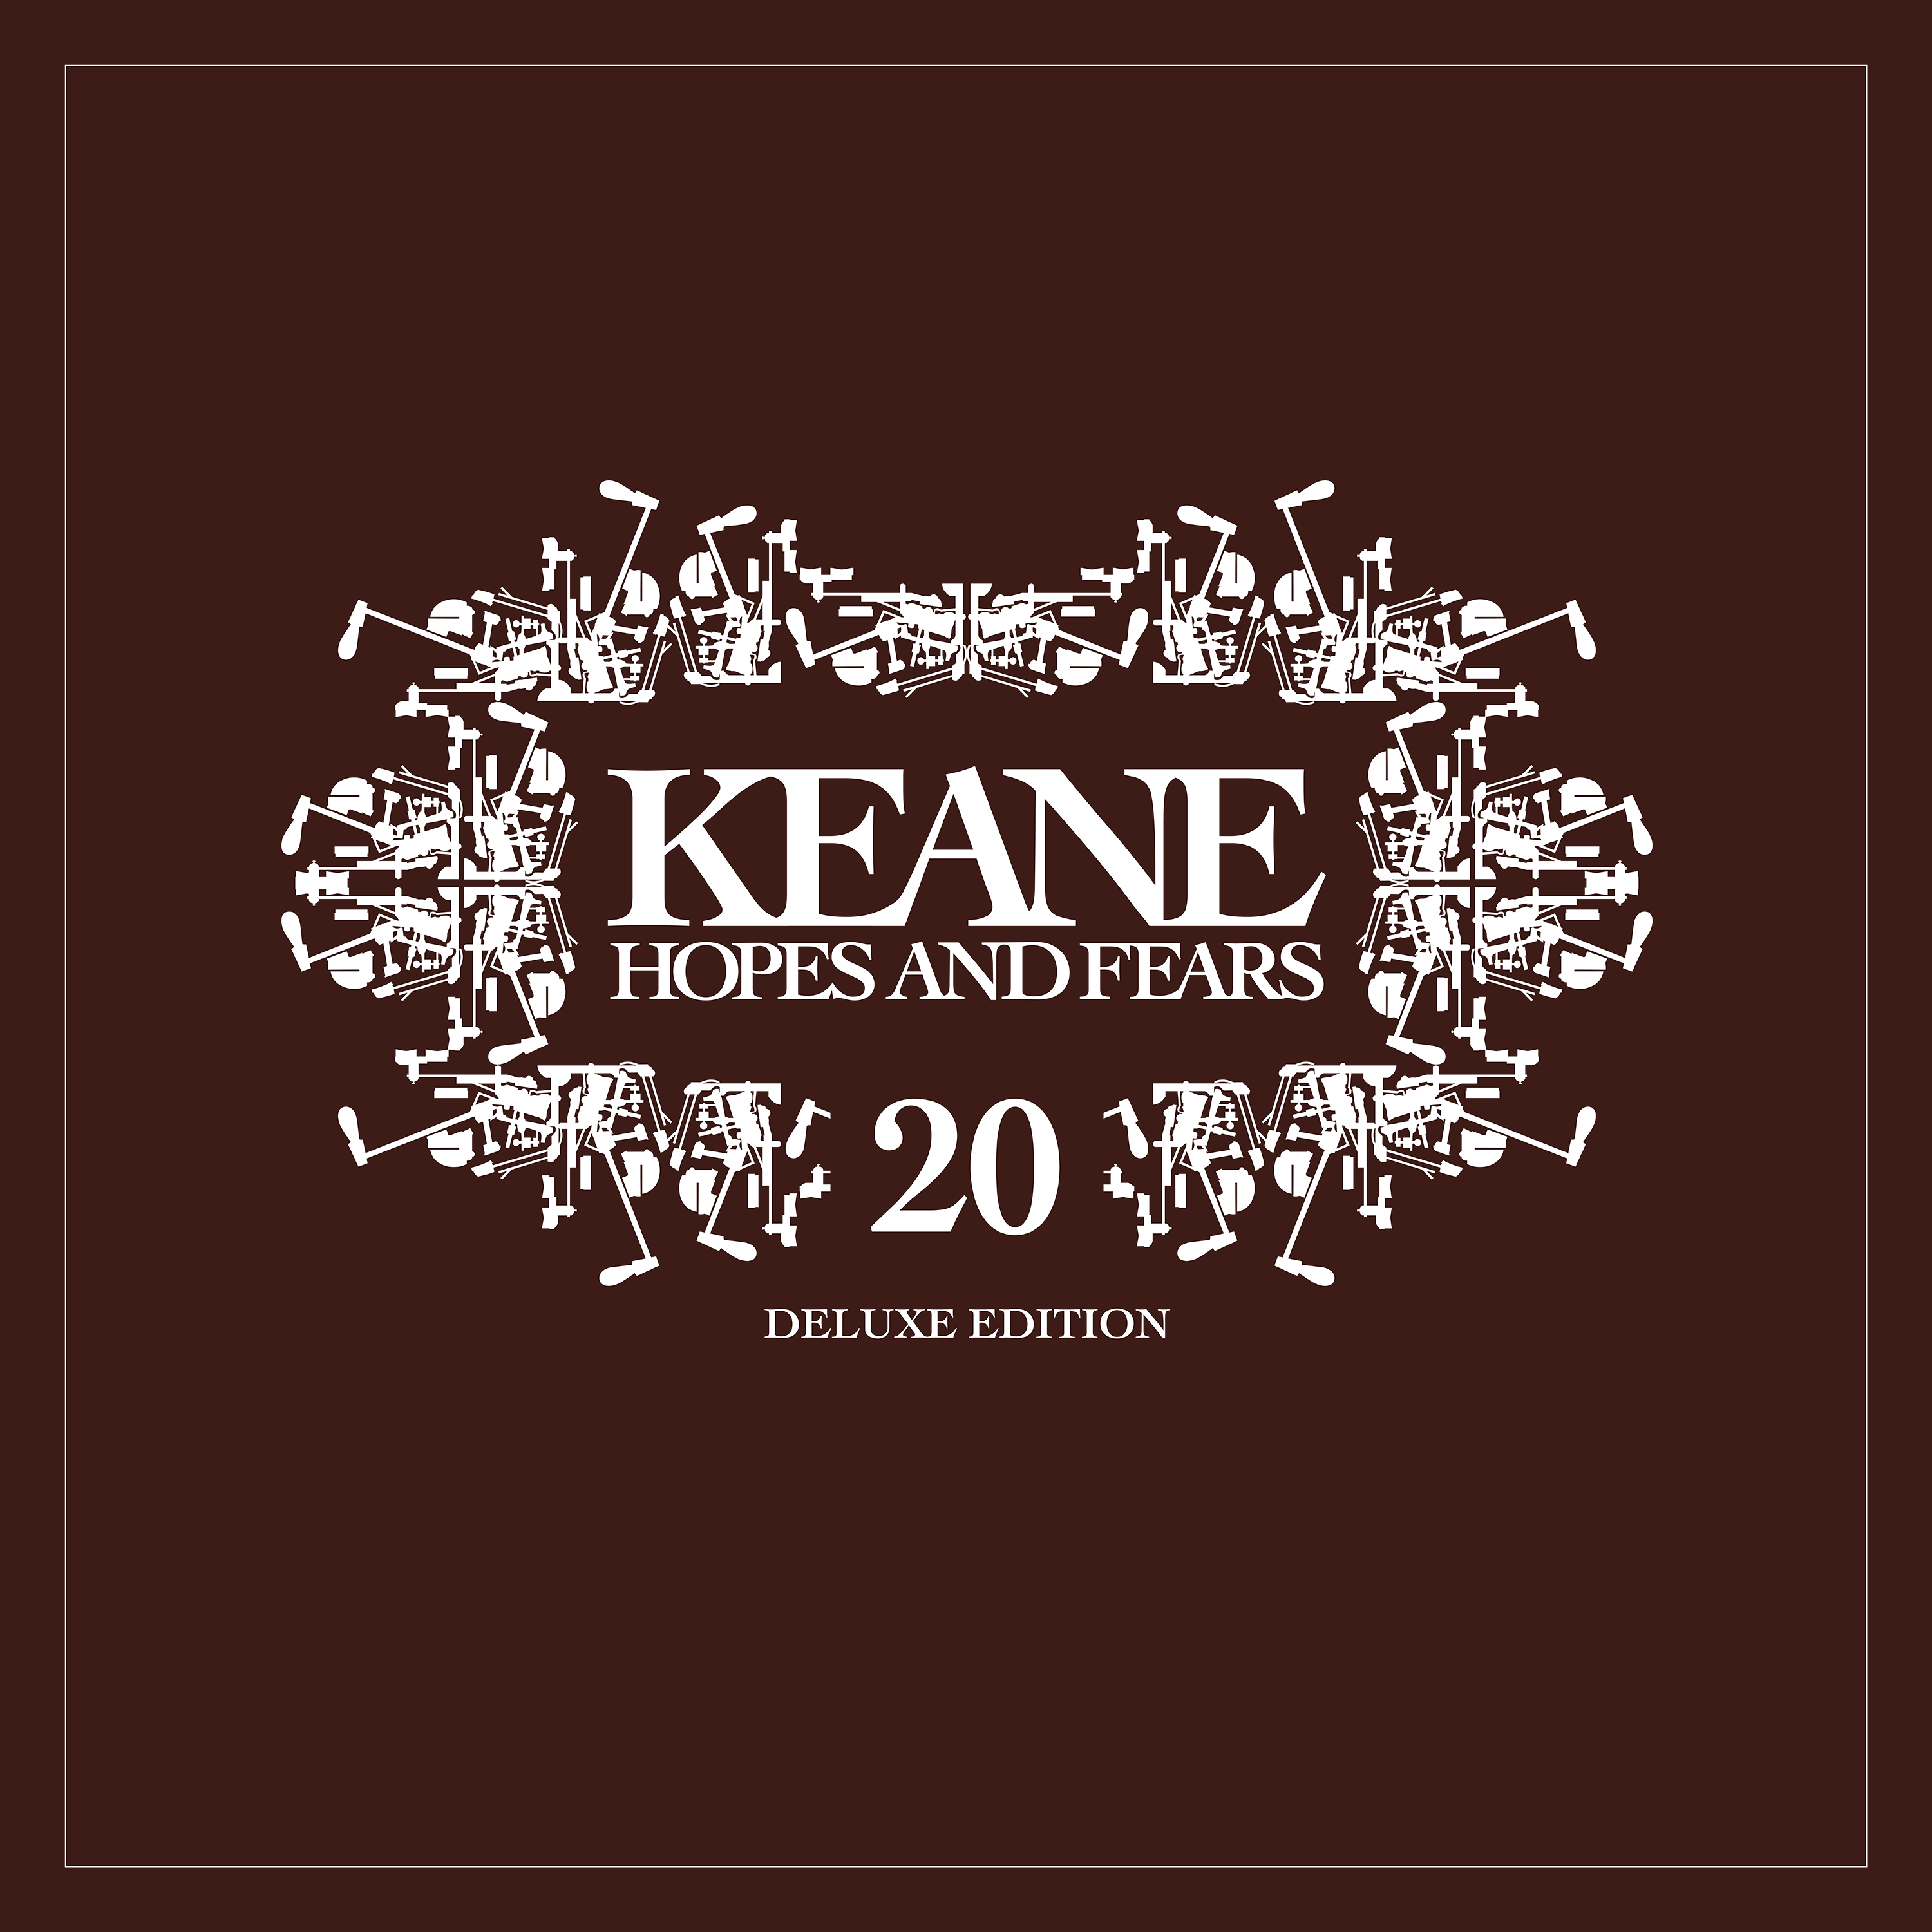 Keane - 20th Anniversary Signed Hopes and Fears Limited Deluxe 3CD Box Set + 7" Single